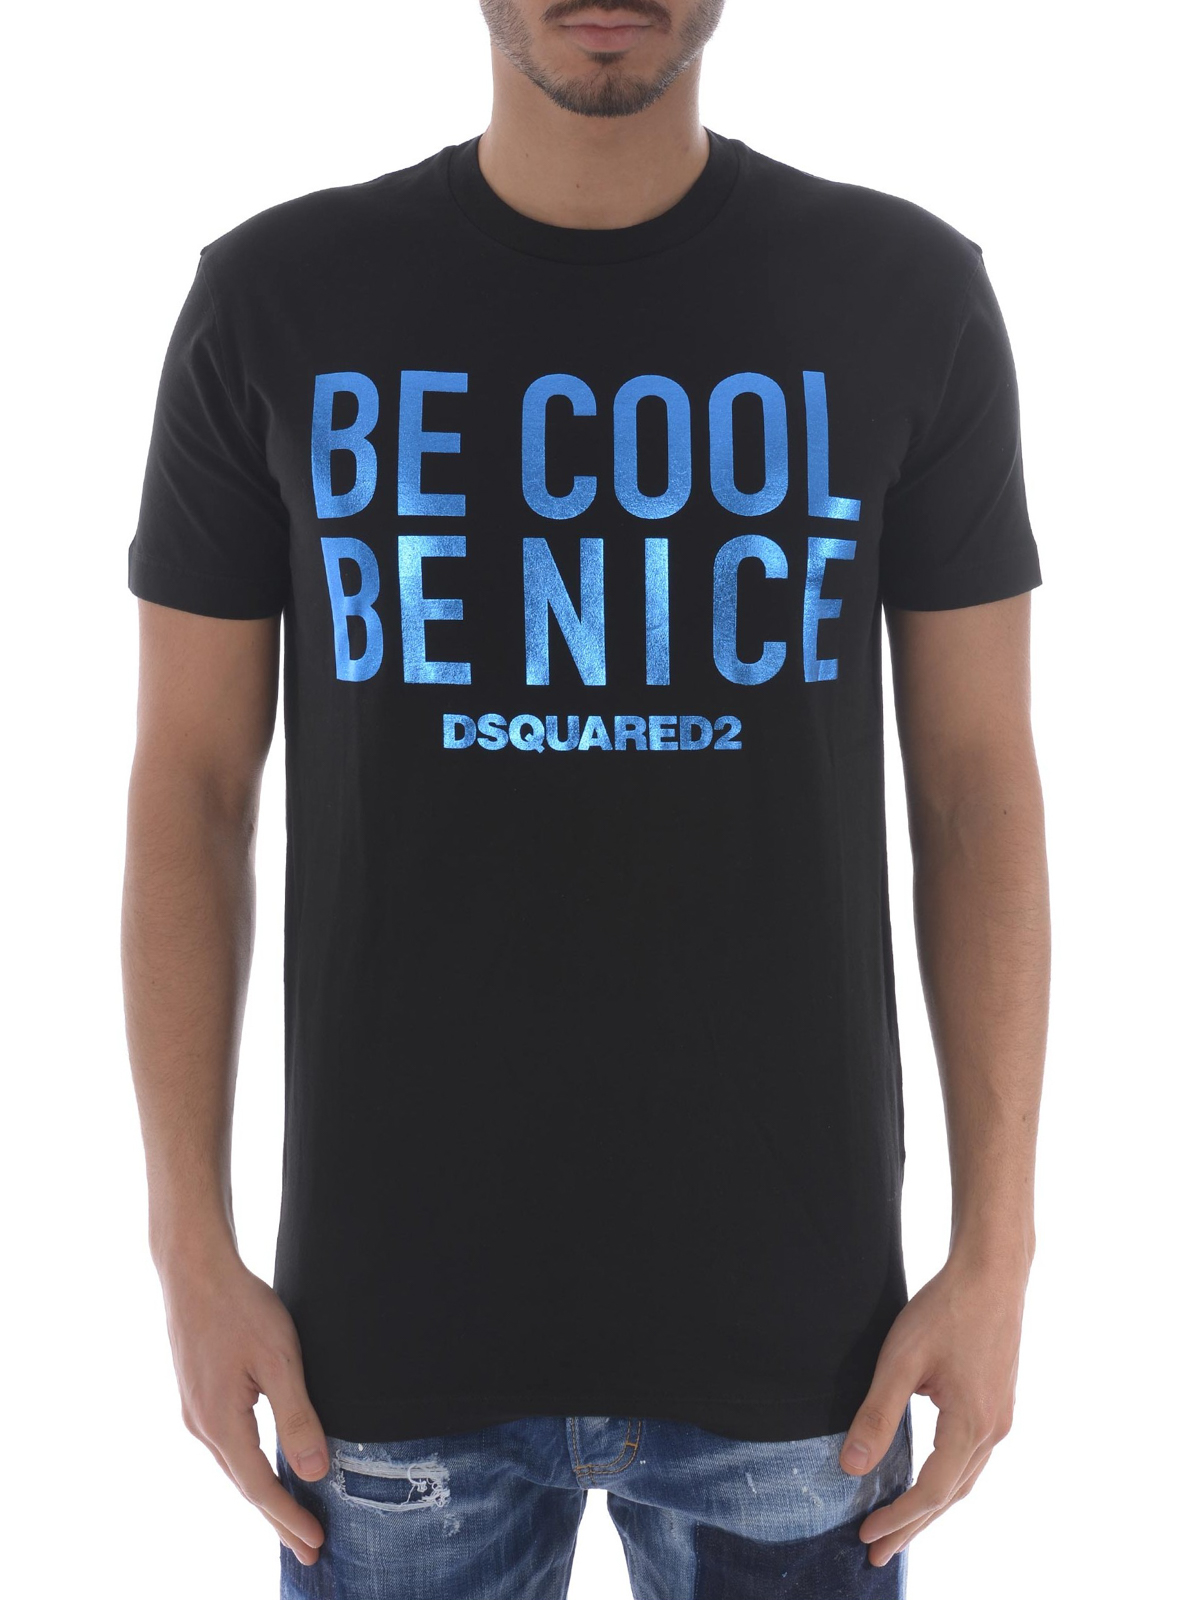 t shirt dsquared2 be cool be nice